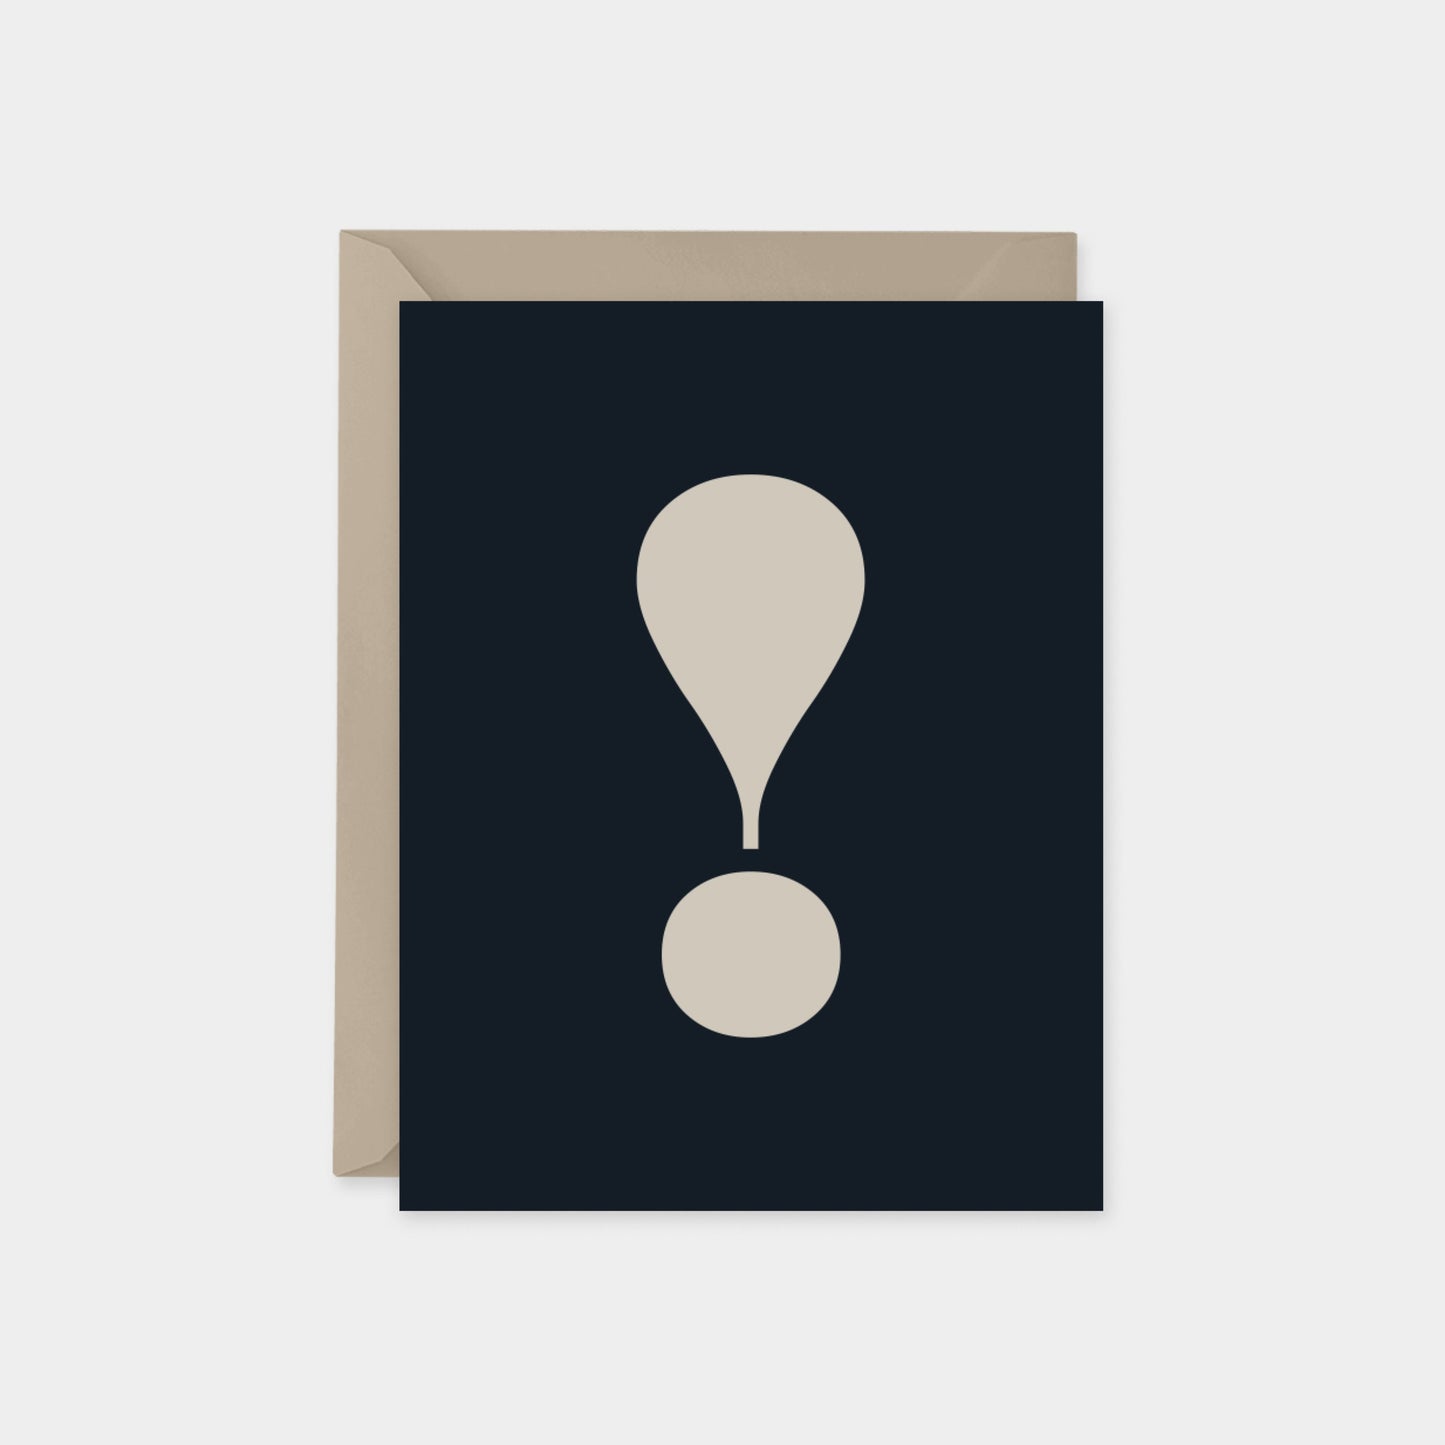 Surprise Exclamation Point Card,